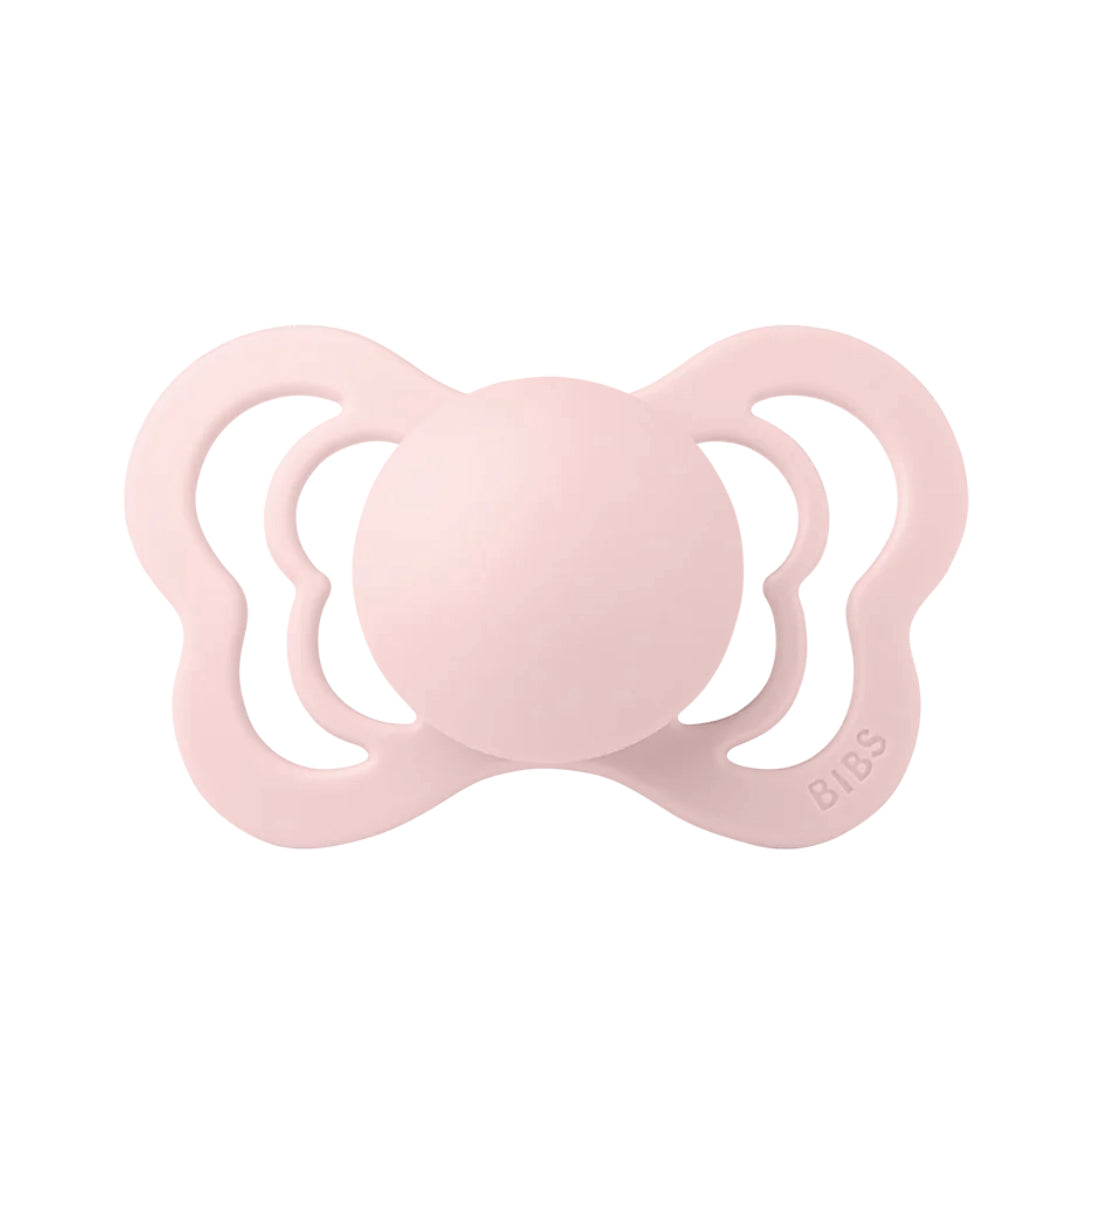 BIBS Couture Soft Silicone Pacifier - Blossom (2 pack)